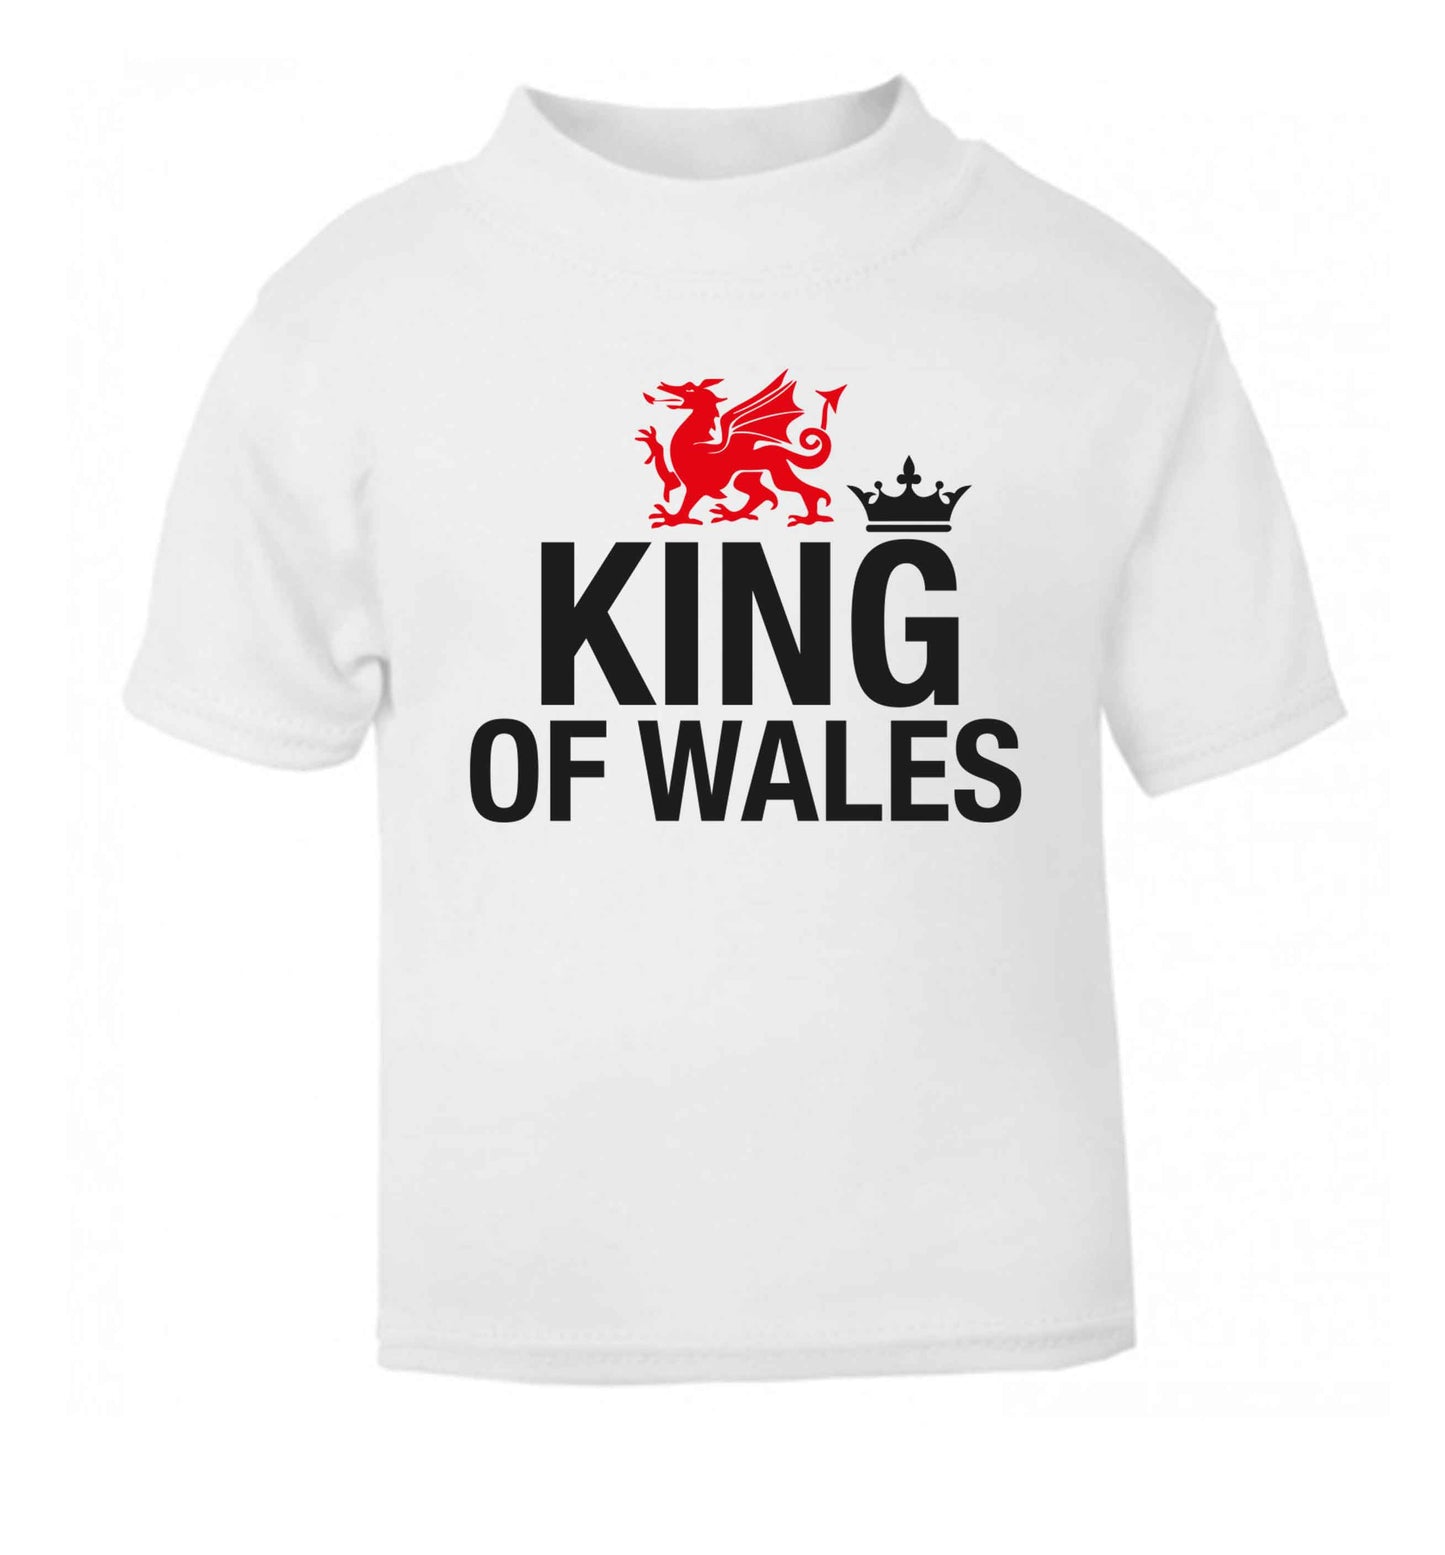 King of Wales white Baby Toddler Tshirt 2 Years